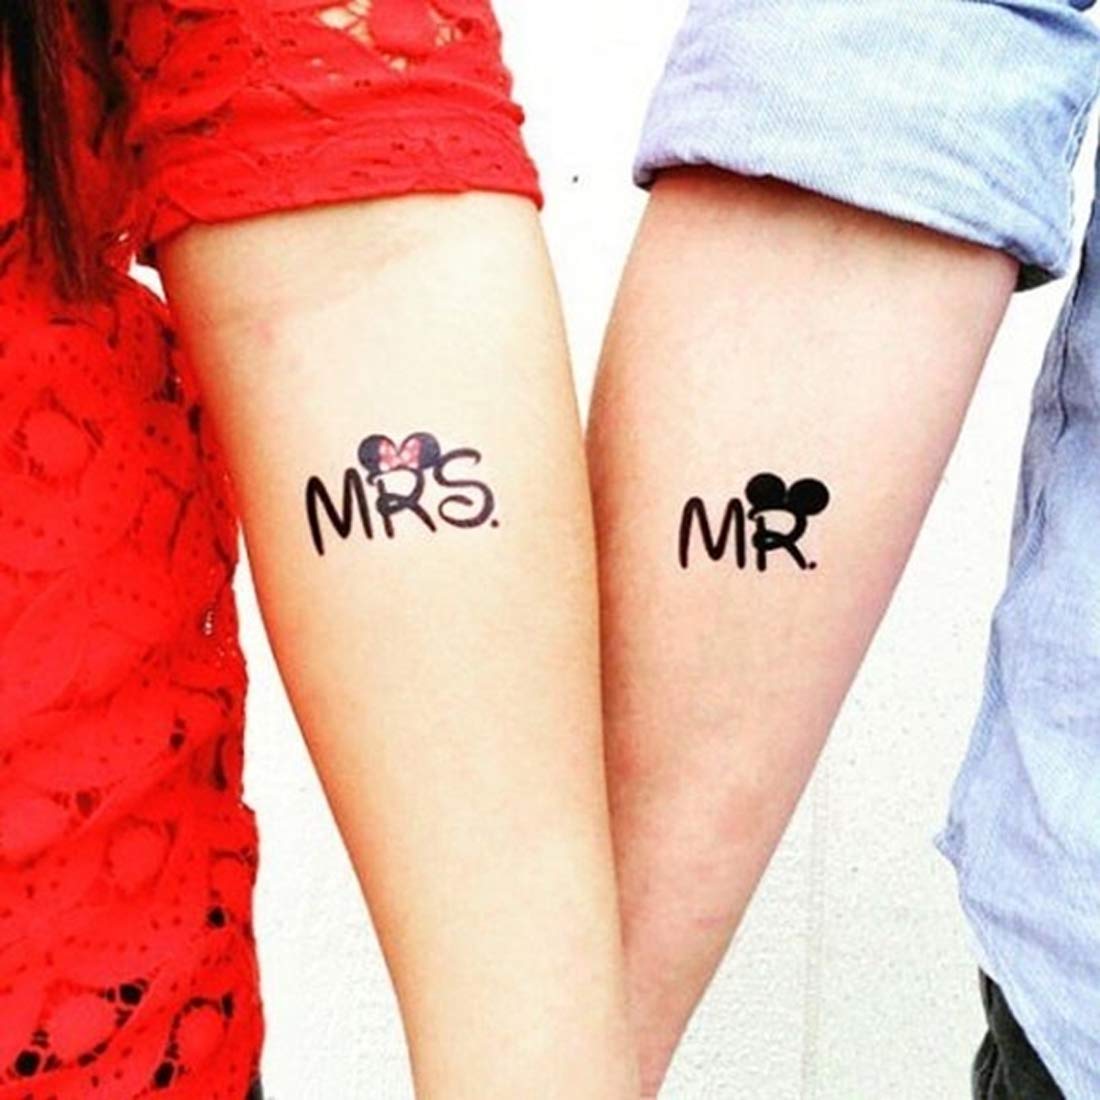 S and N letter tattoo ✌🏻❤️ | Instagram